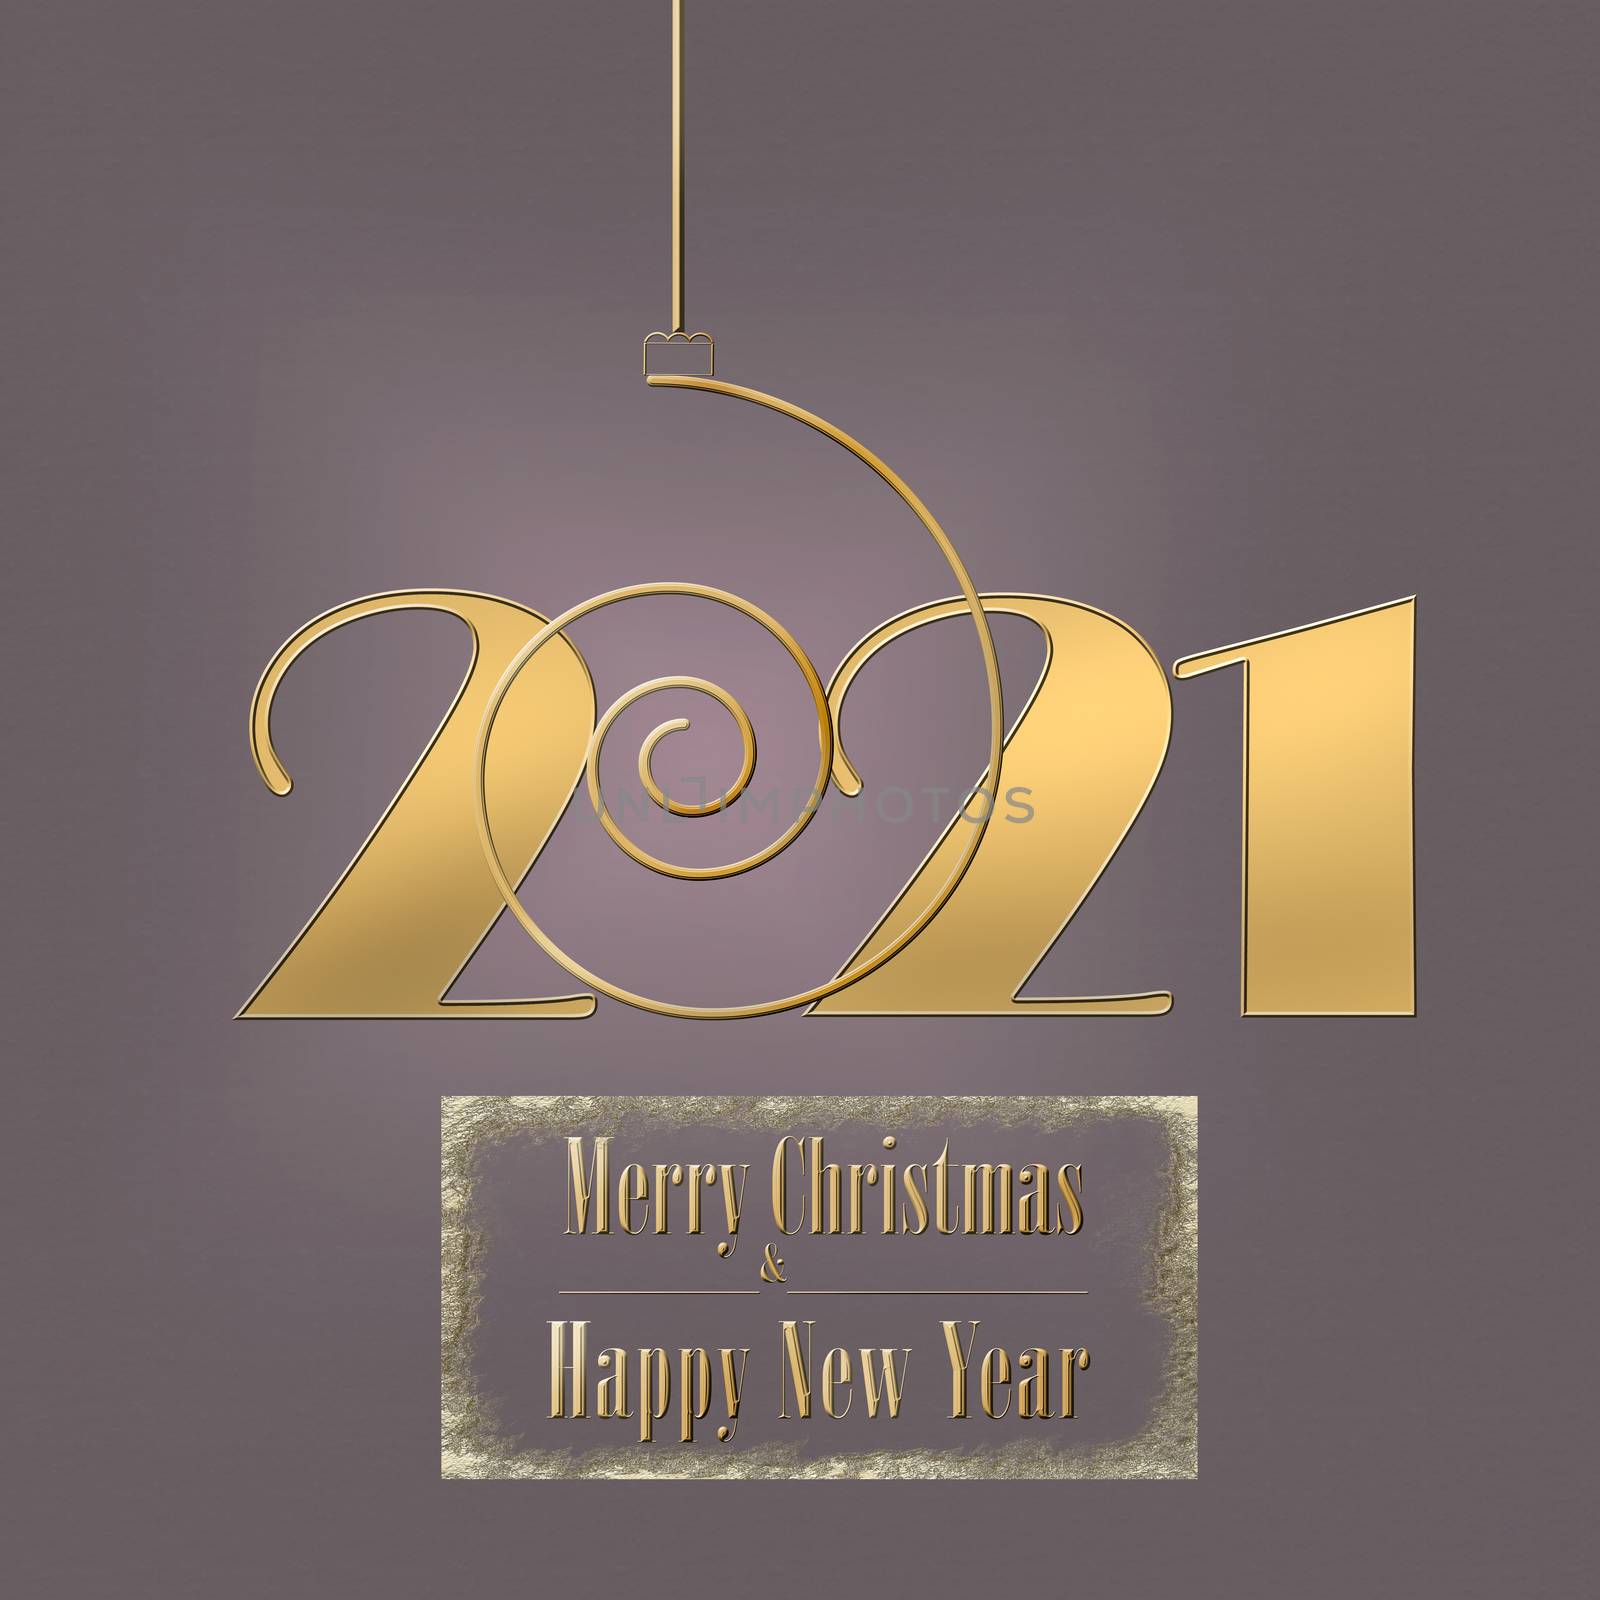 Classy gold text 2021 Happy New Year Merry Christmas. Golden design for Christmas and New Year 2021 greeting cards on pastel background. Copy space, mock up. 3D illustration